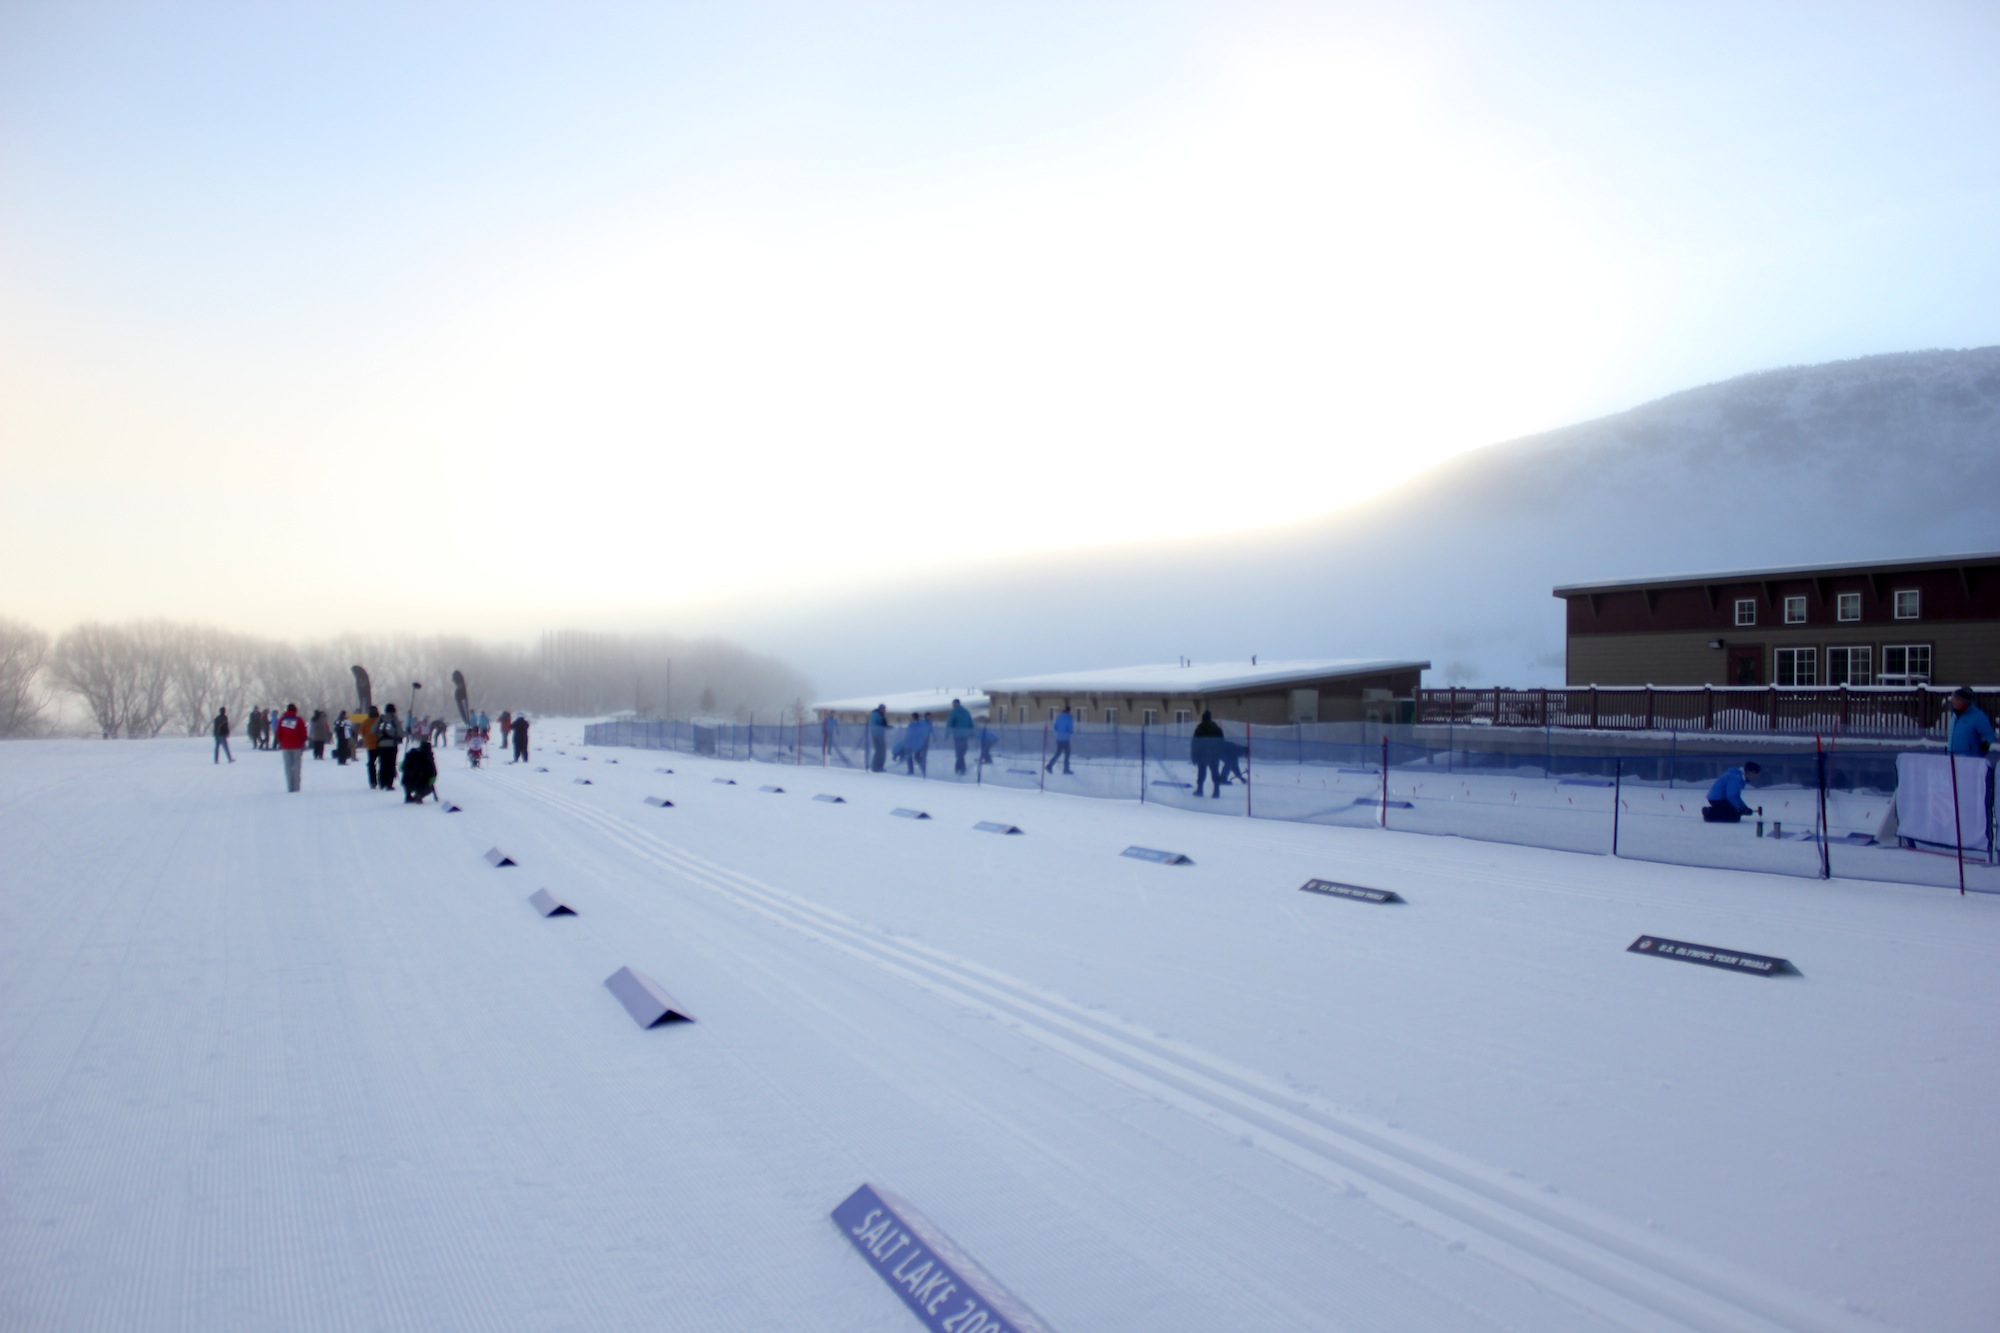 2014 U.S. Cross Country Championships: The Calm Before the Storm